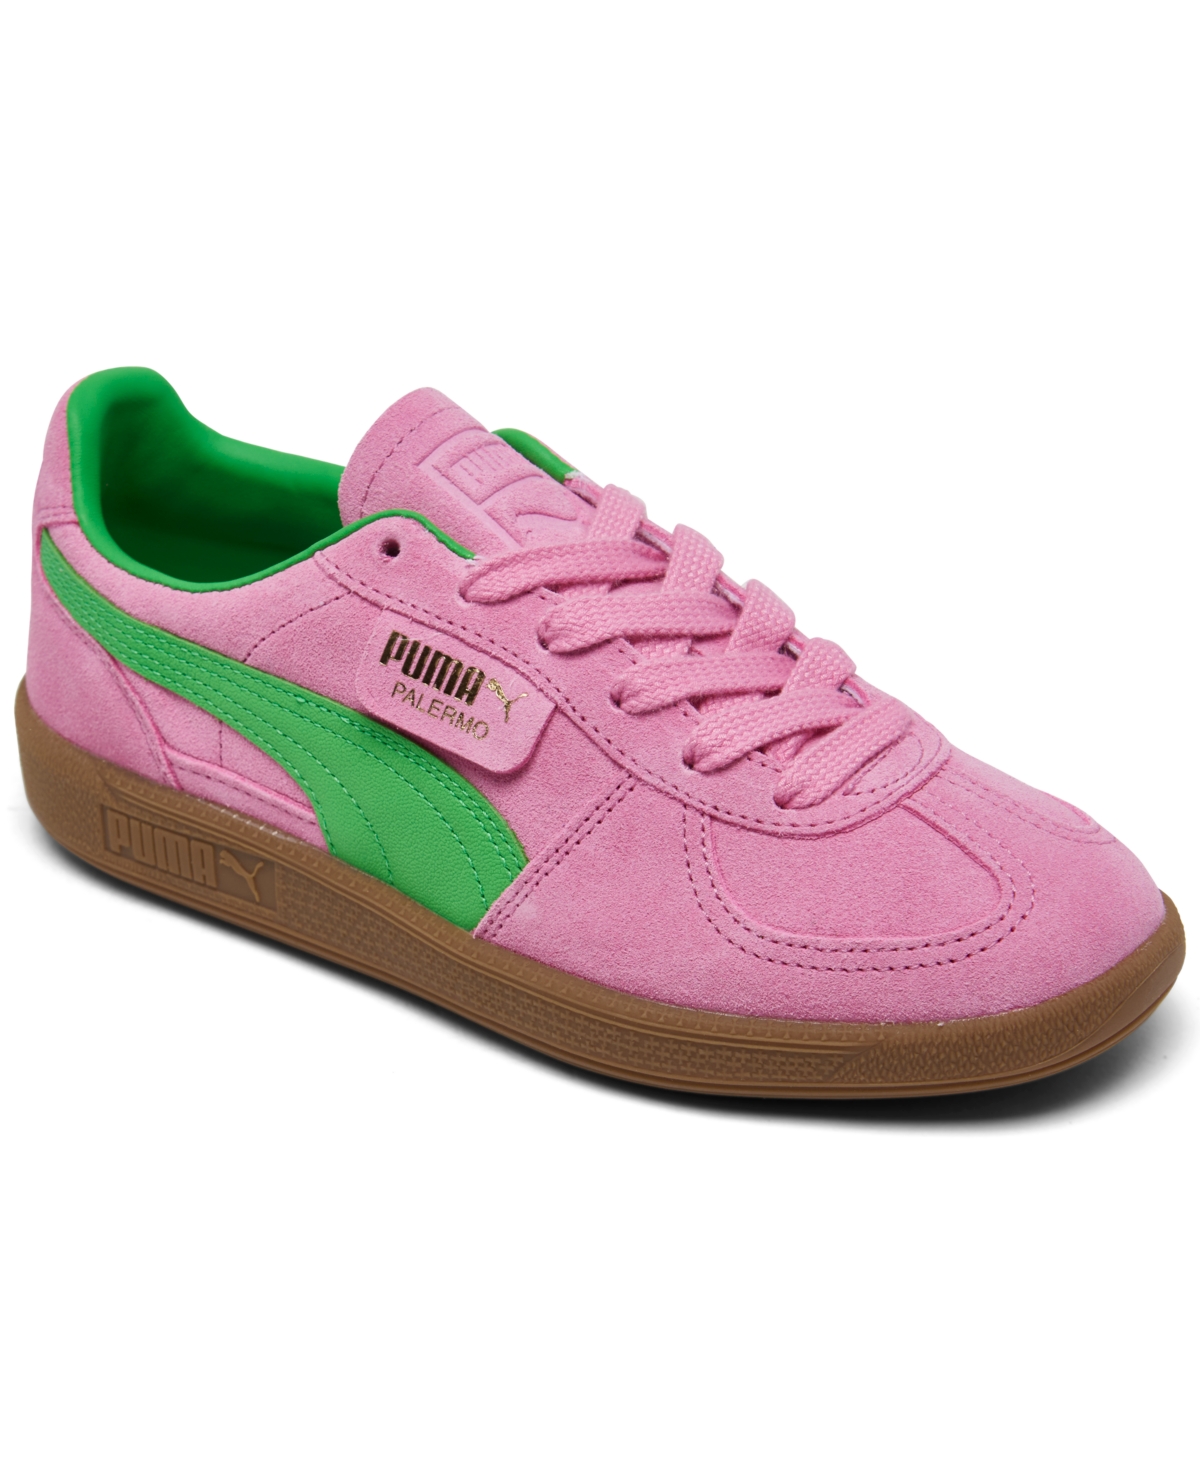 Shop Puma Women's Palermo Special Casual Sneakers From Finish Line In Pink Delight, Green